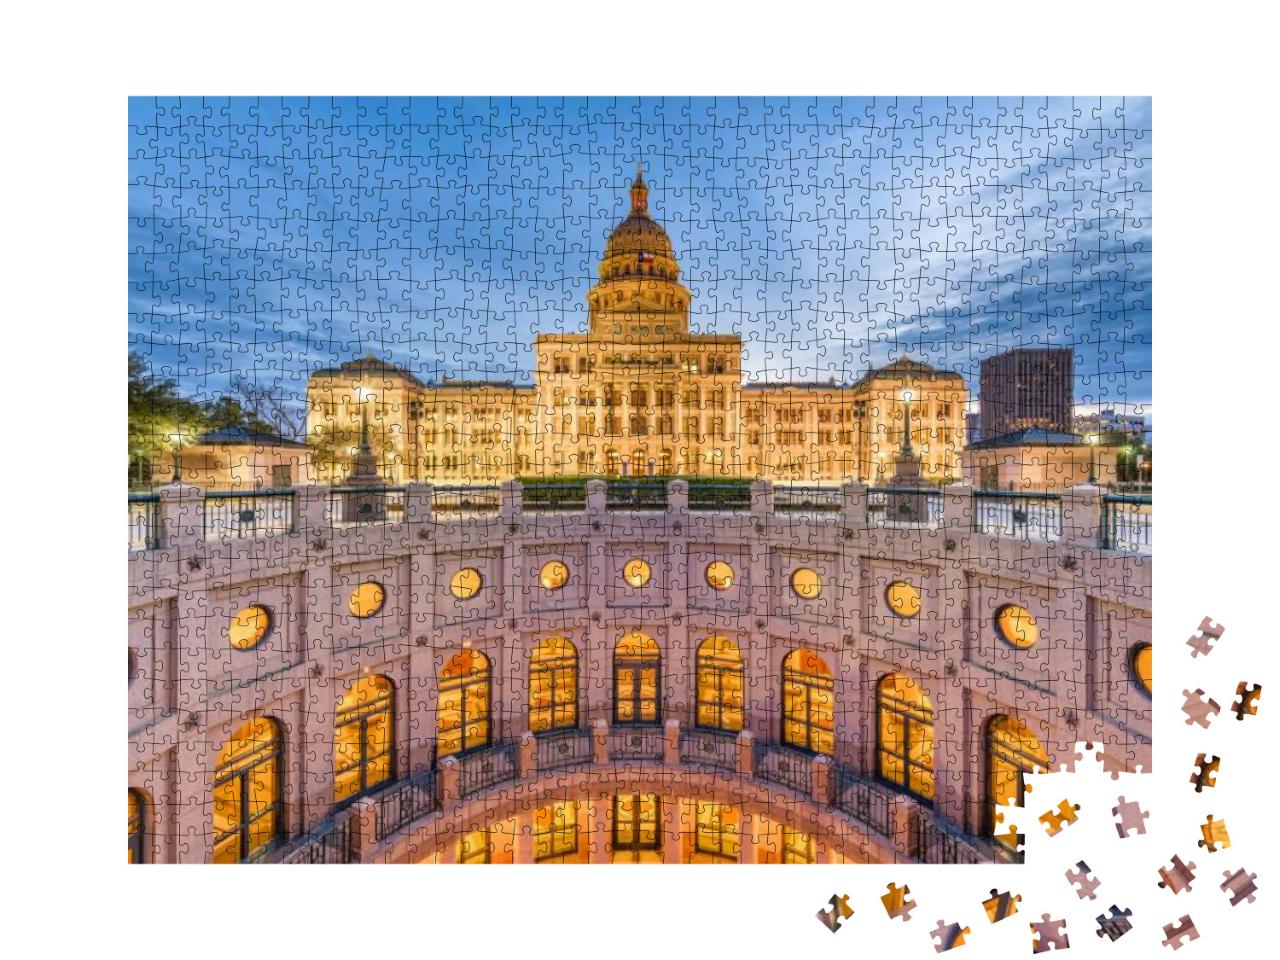 Austin, Texas, USA At the Texas State Capitol... Jigsaw Puzzle with 1000 pieces